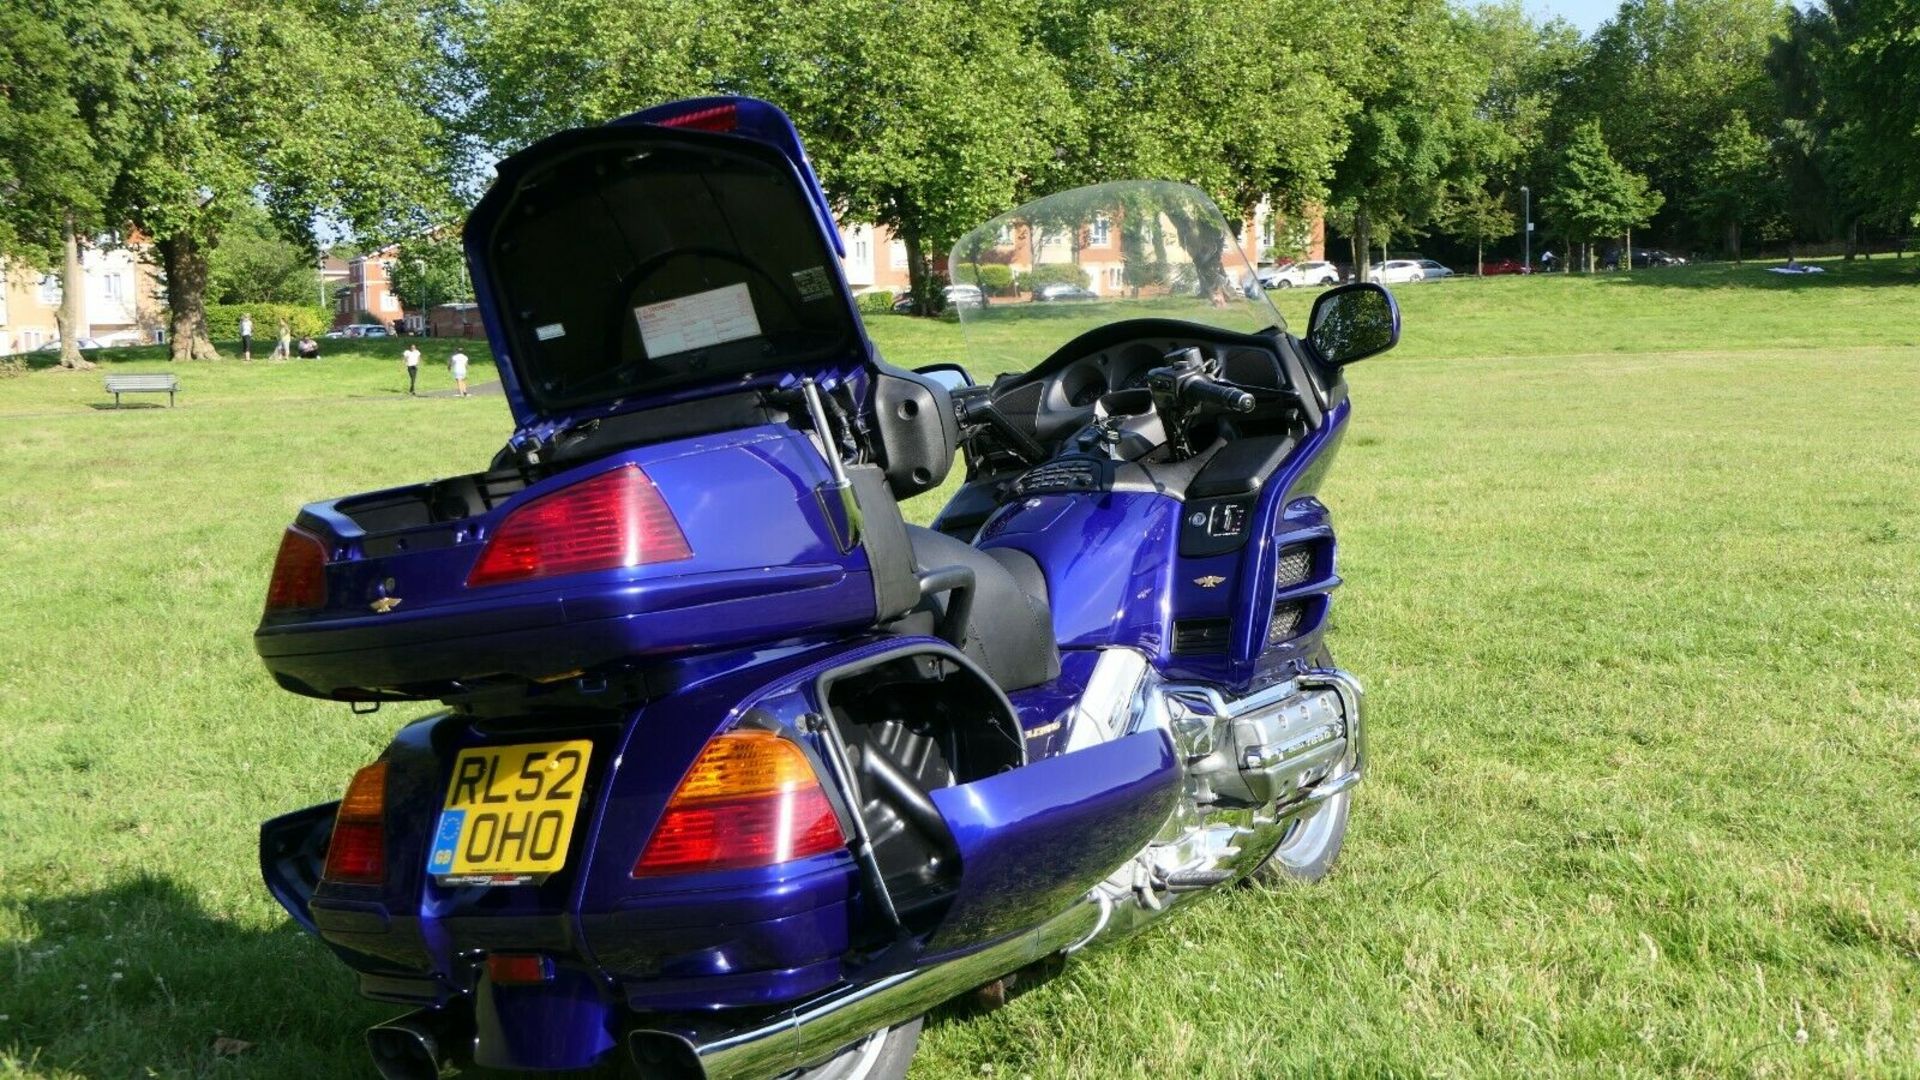 HONDA GL1800 GOLDWING ABS 2003 MOTORCYCLE 51K MILES - EXTRAS, MOT, LOW MILES, FSH, GREAT CONDITION - Image 6 of 12